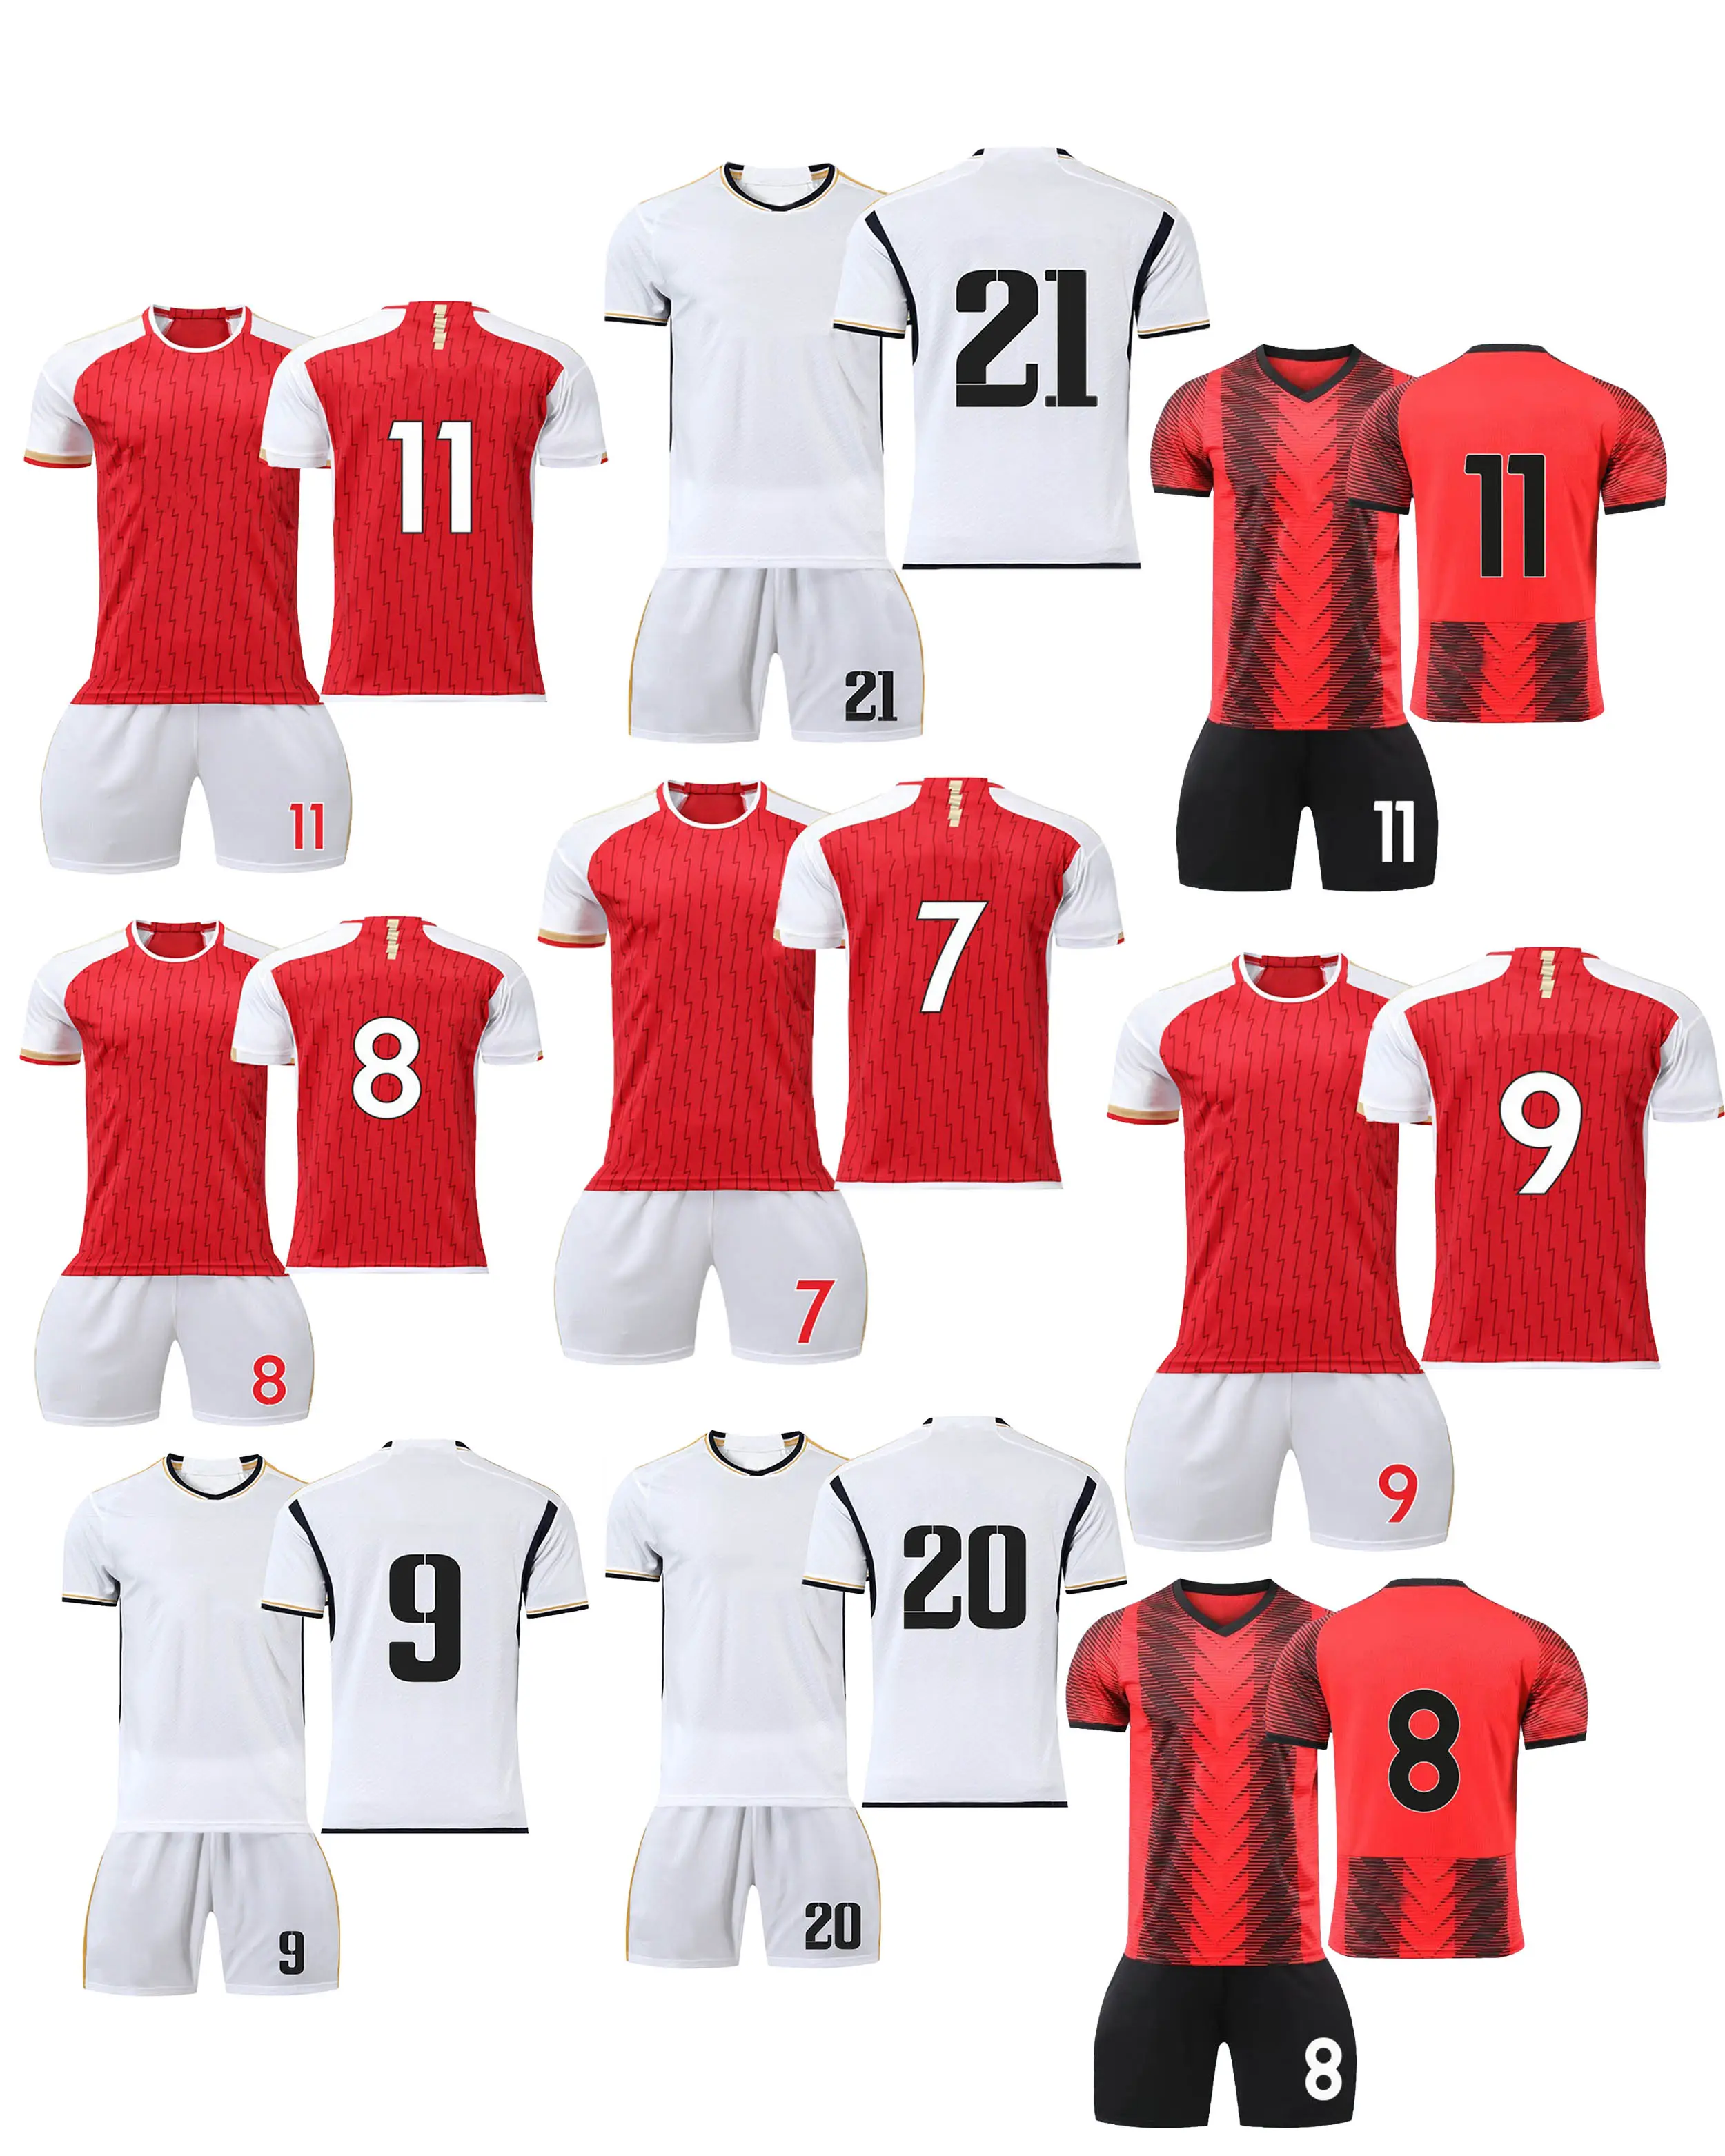 24-25 Wholesale of new football uniforms adult and children's sets multiple styles of football tops in stock direct sales